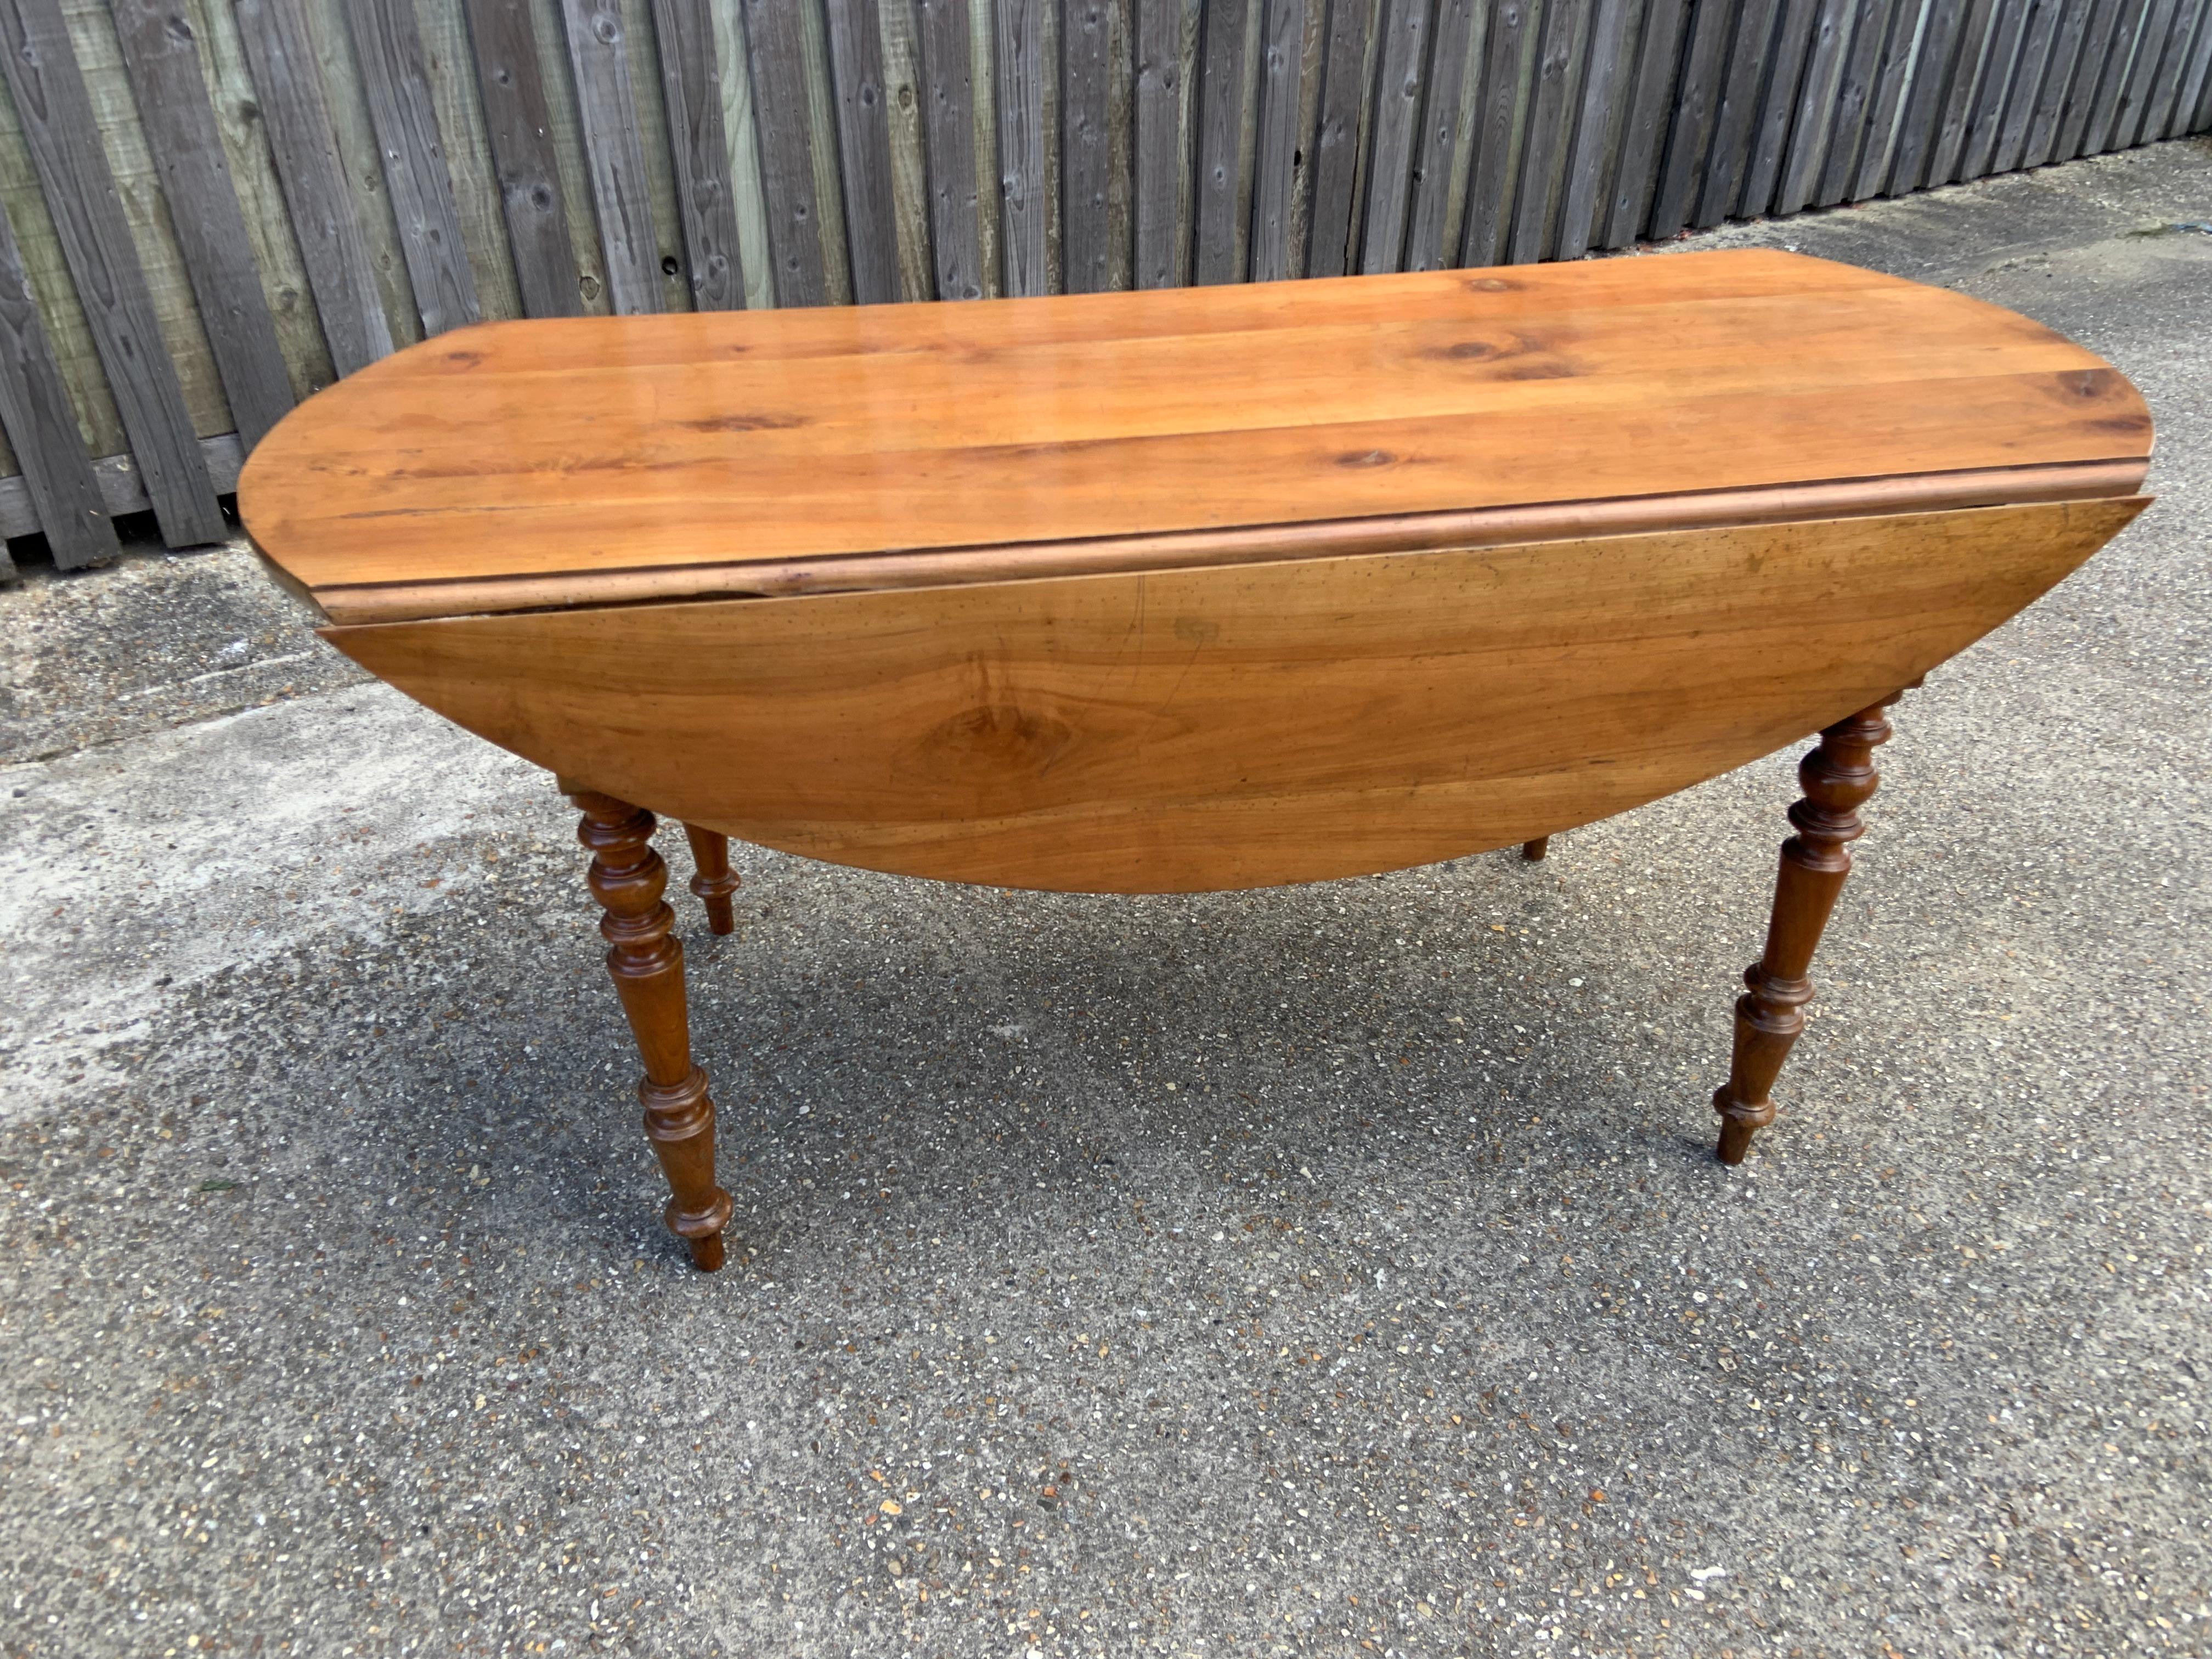 Antique Cherry oval drop leaf dining table. Table centre with Leaves down measures 25